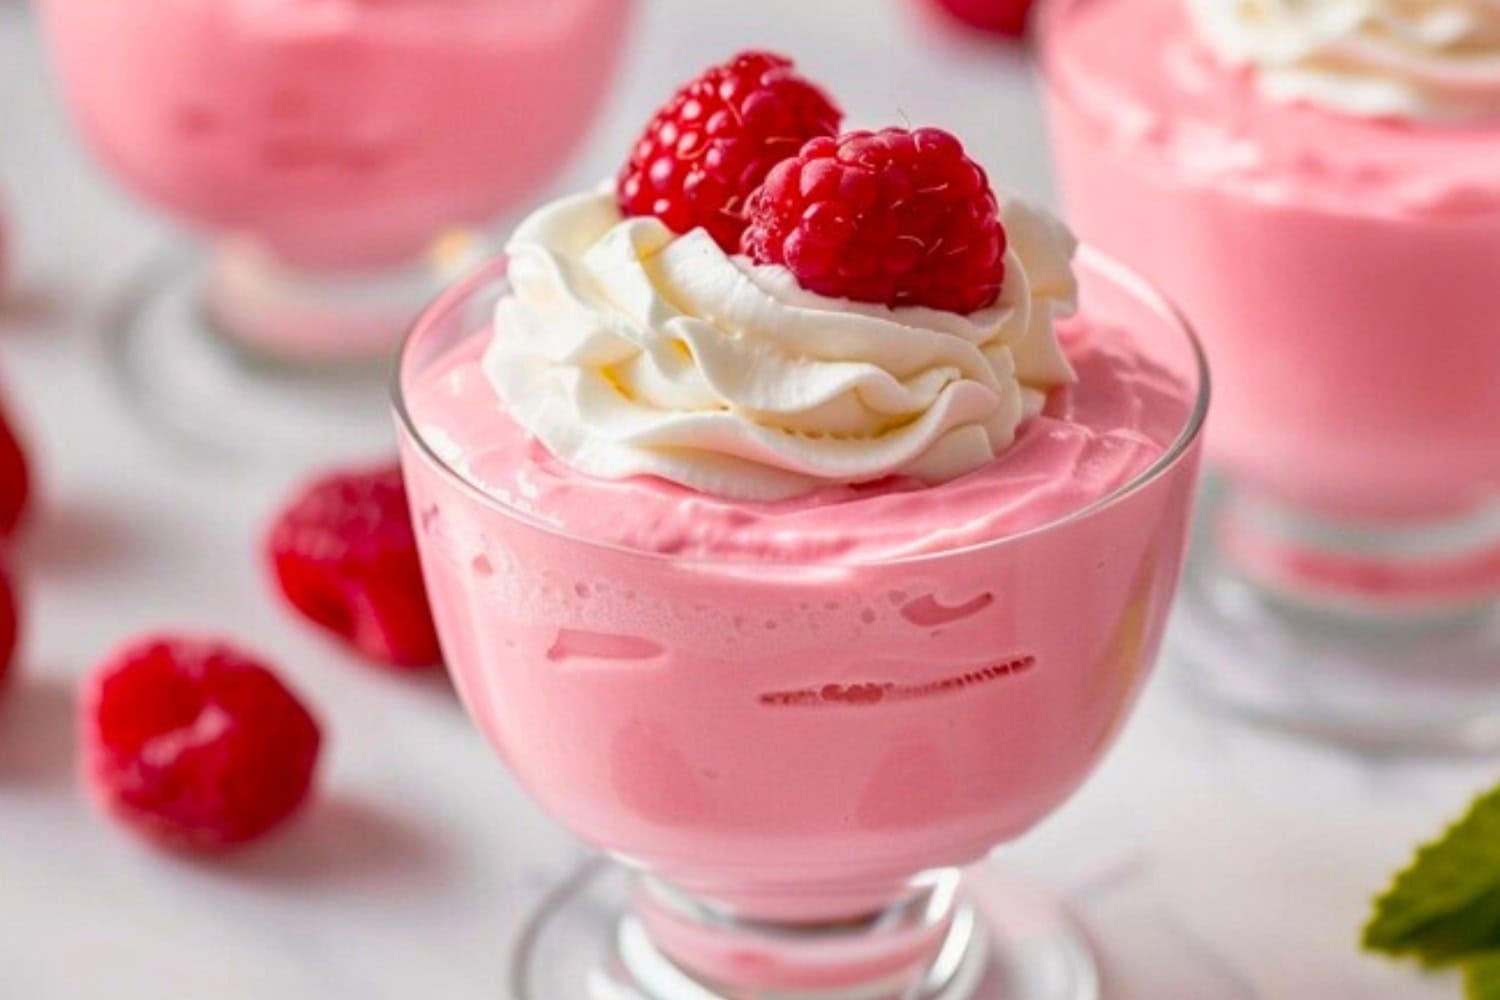 Raspberry mousse with whipped cream and raspberry garnish on top.